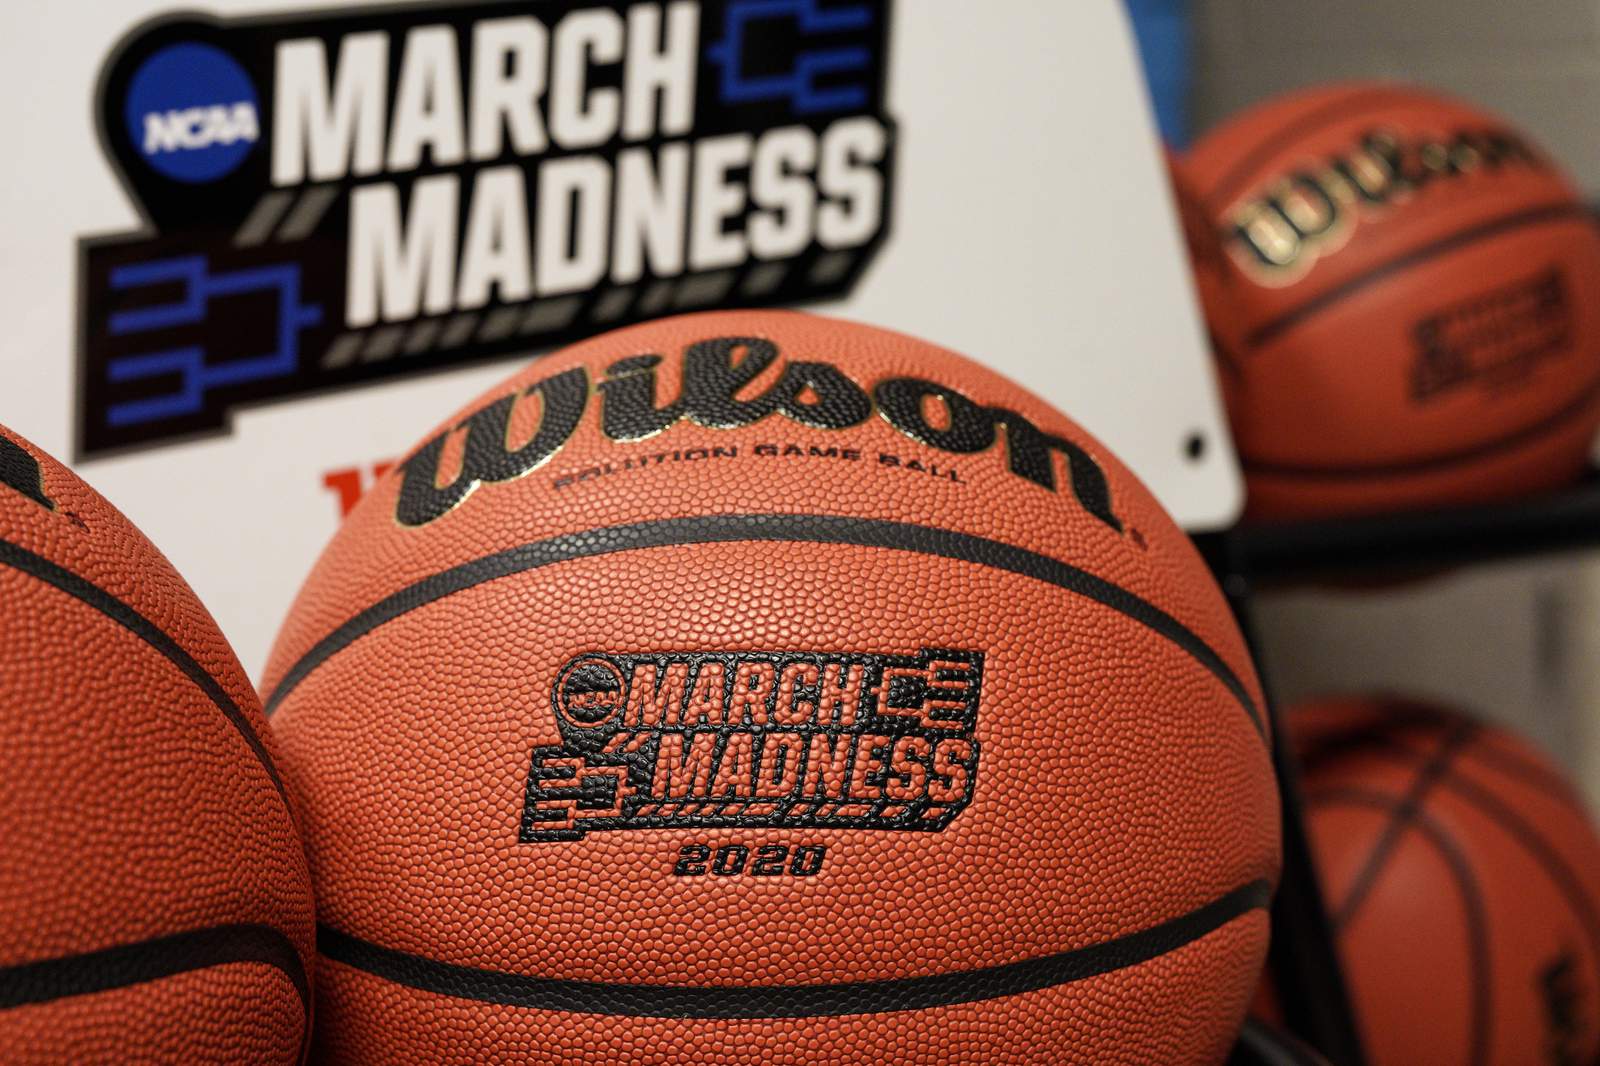 March Madness games to be played in Orlando in 2023